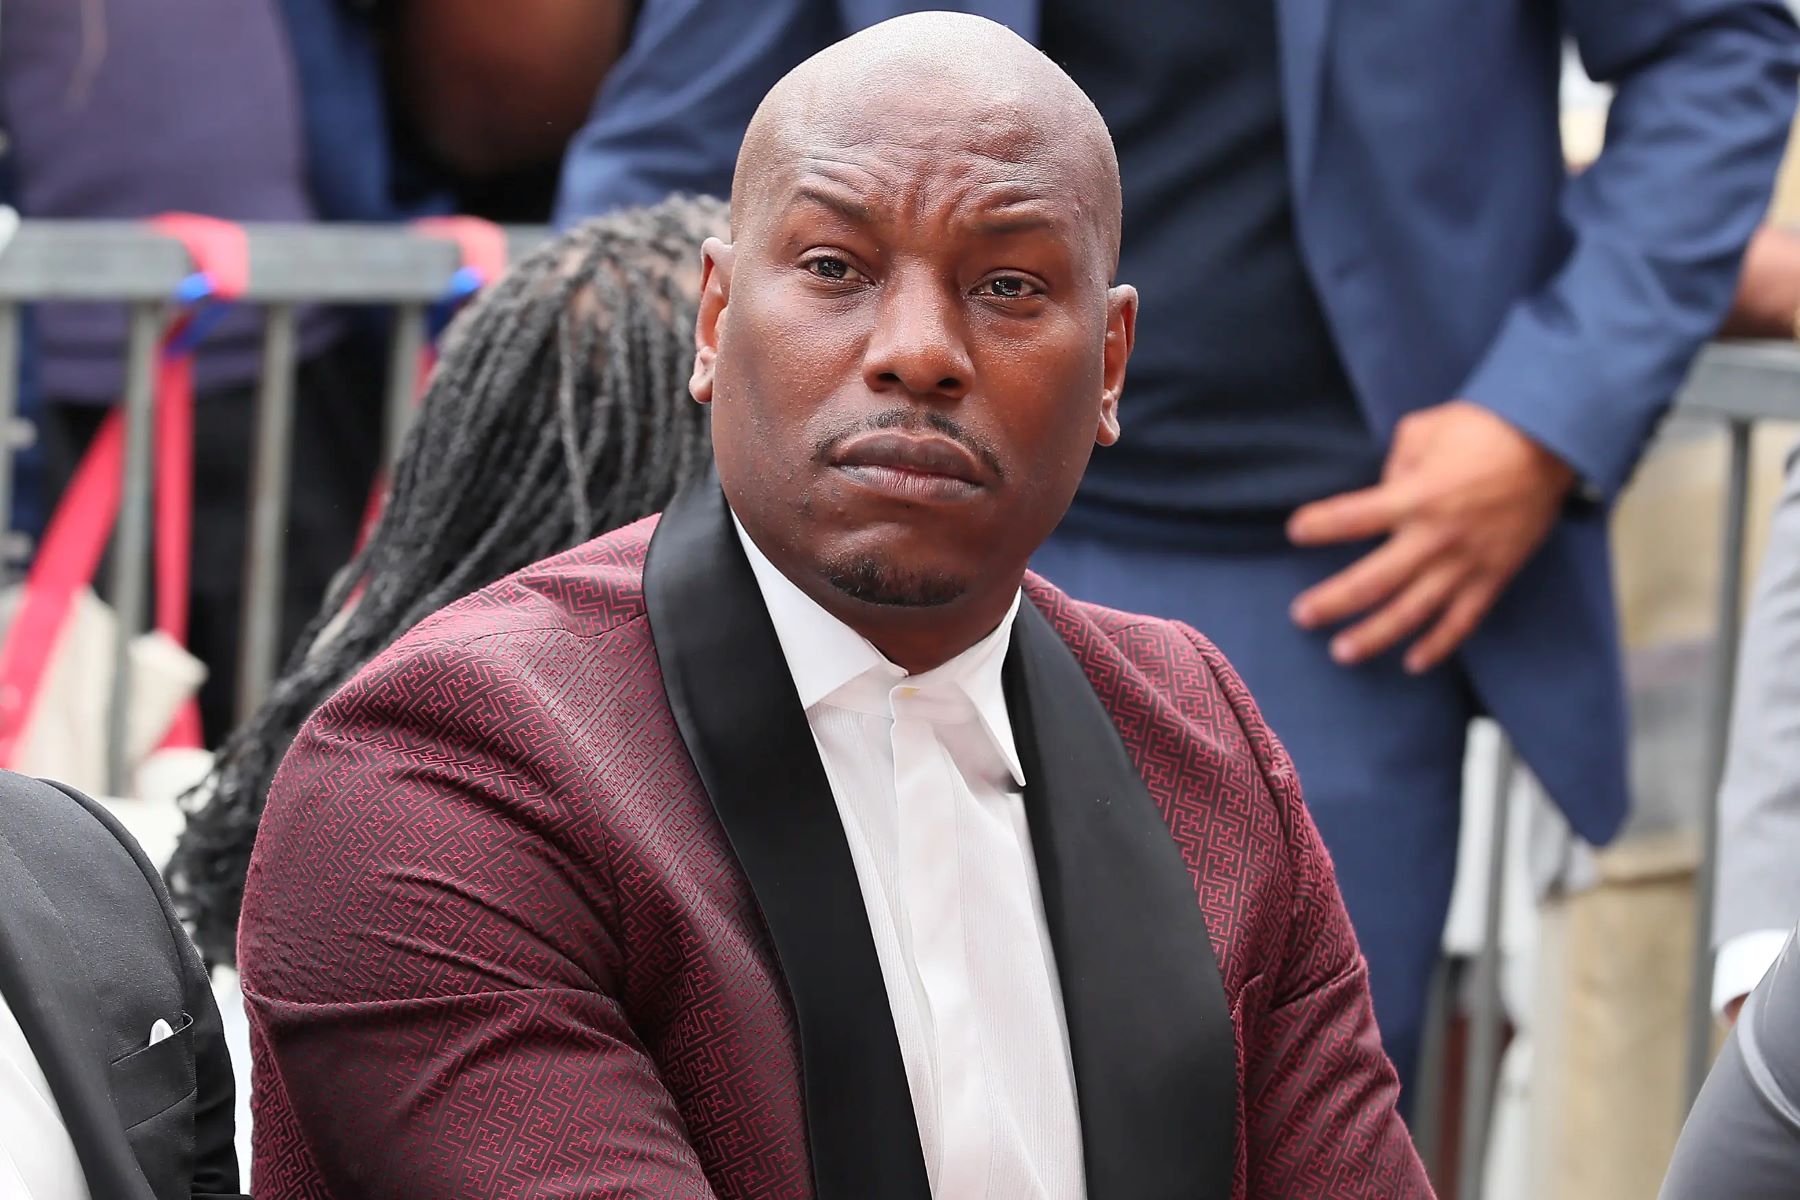 Tyrese Gibson Stands Up Against Home Depot, Refuses To Be Bullied